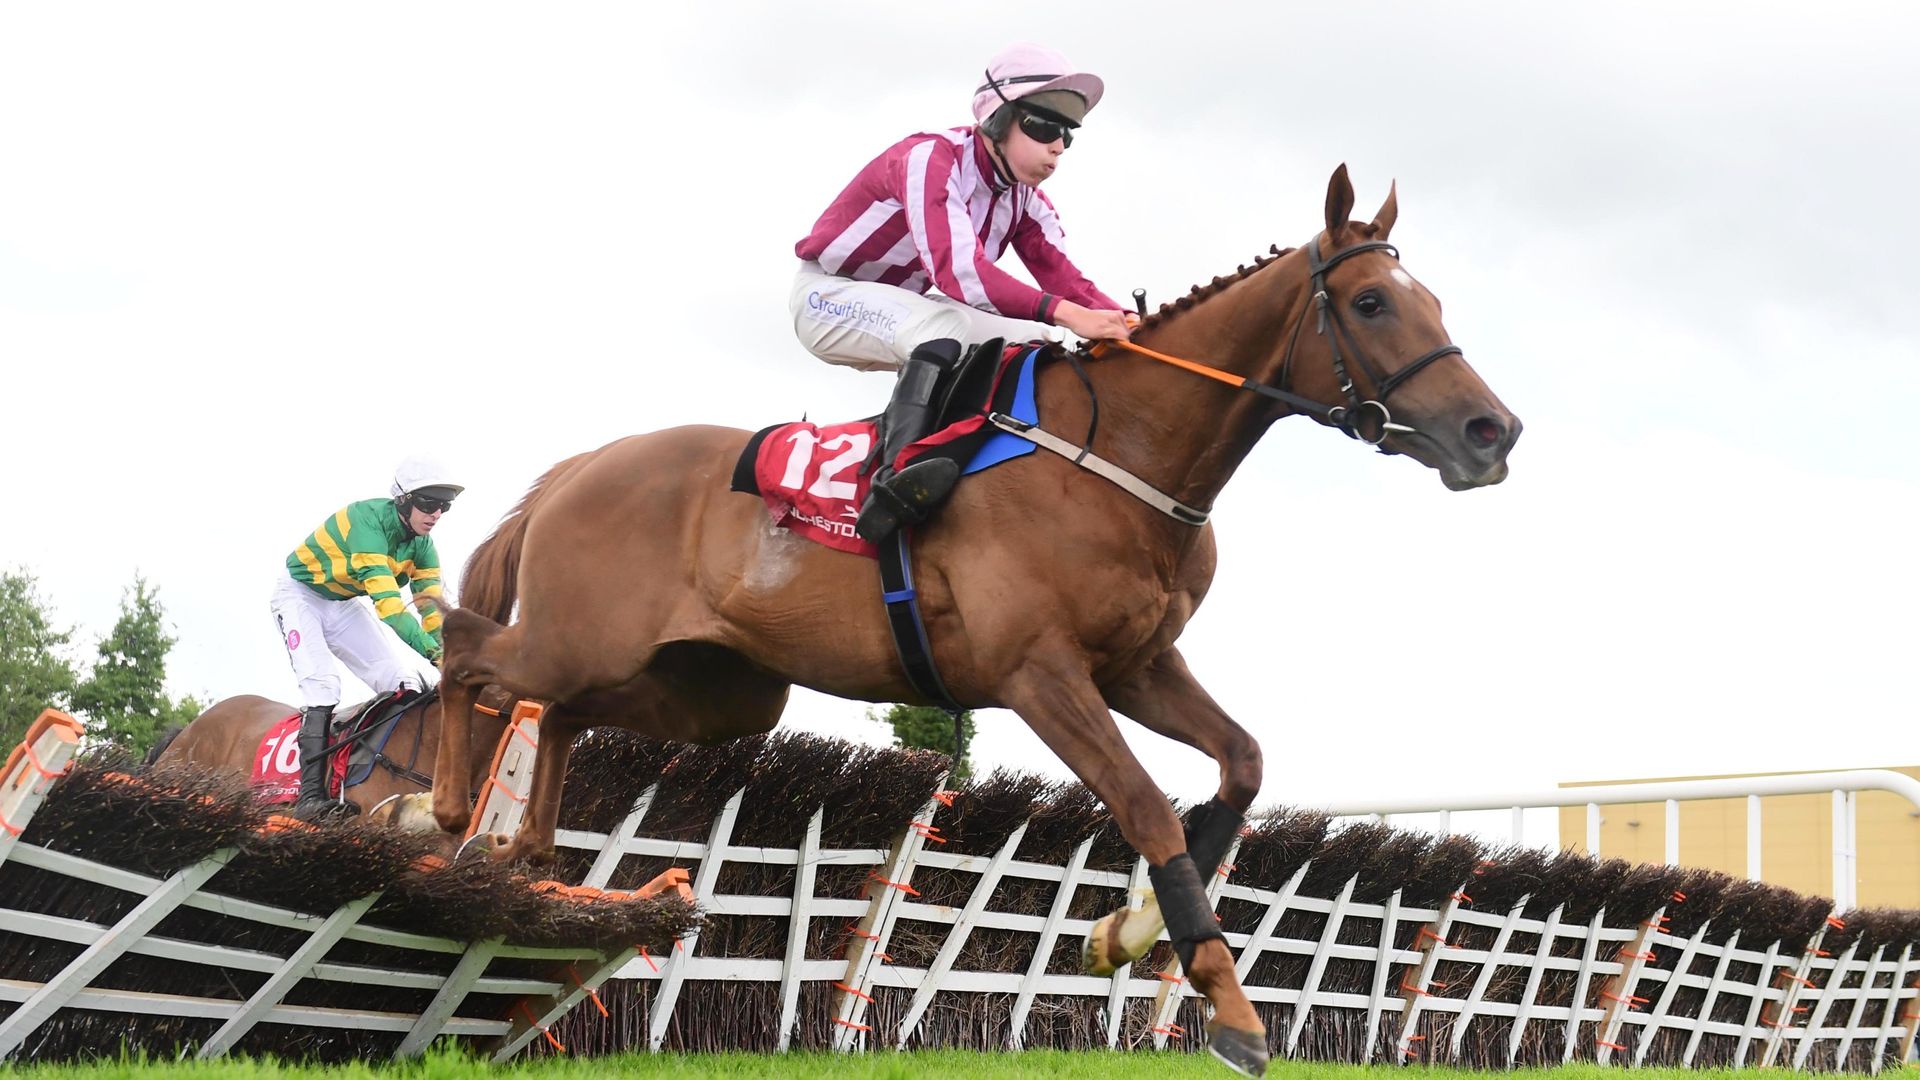 Large-priced winner at Punchestown as Sawbuck springs 300/1 shockSkySports | Information